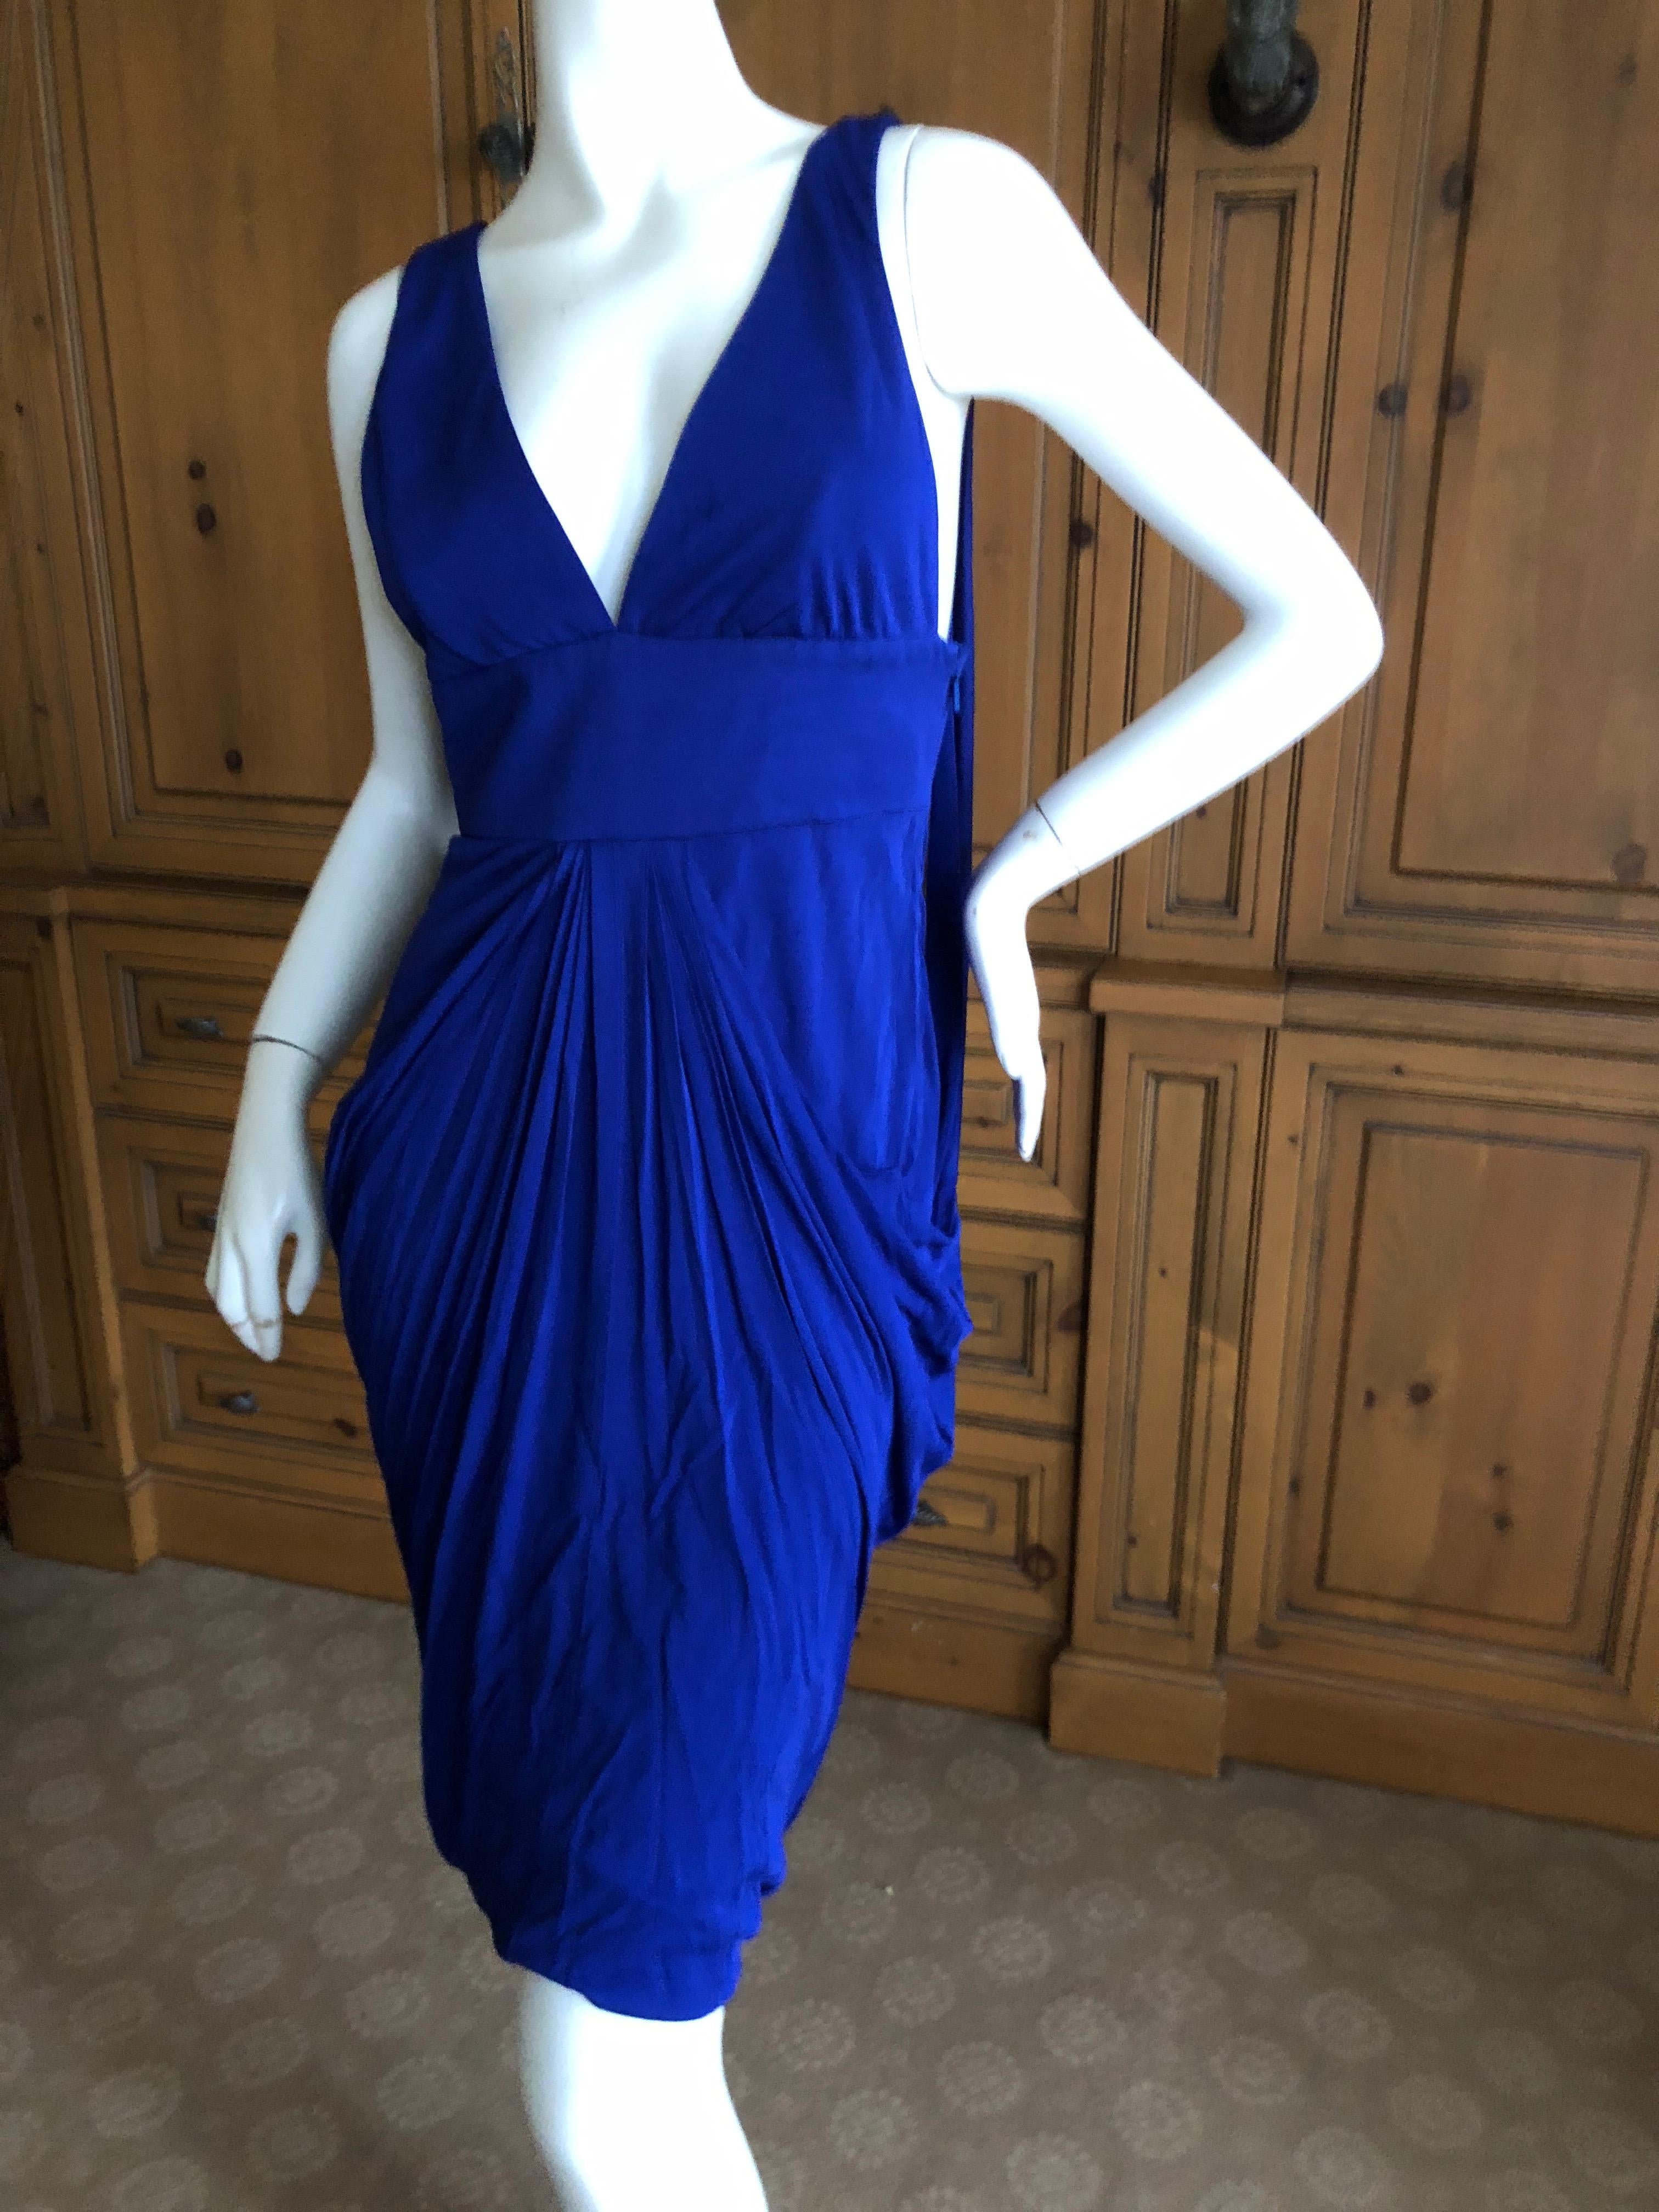 Versace Vintage Purple Pleated Jersey Low Cut Cocktail Dress with Low Back
Supersexy on, this is a wonderful Versace
Size 40
Bust 34